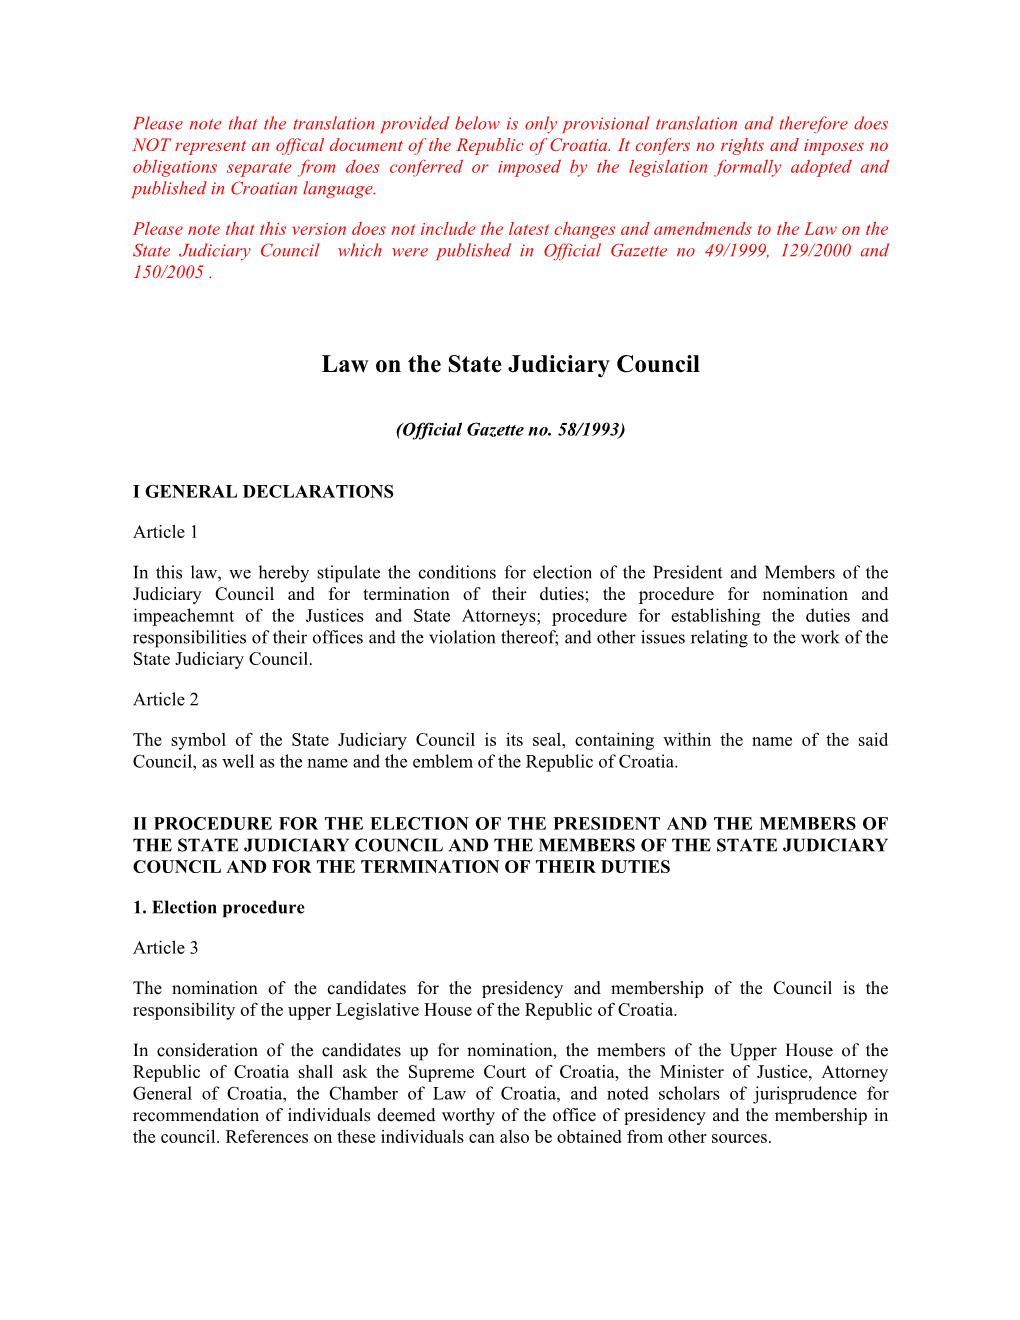 Law on the State Judiciary Council Which Were Published in Official Gazette No 49/1999, 129/2000 and 150/2005